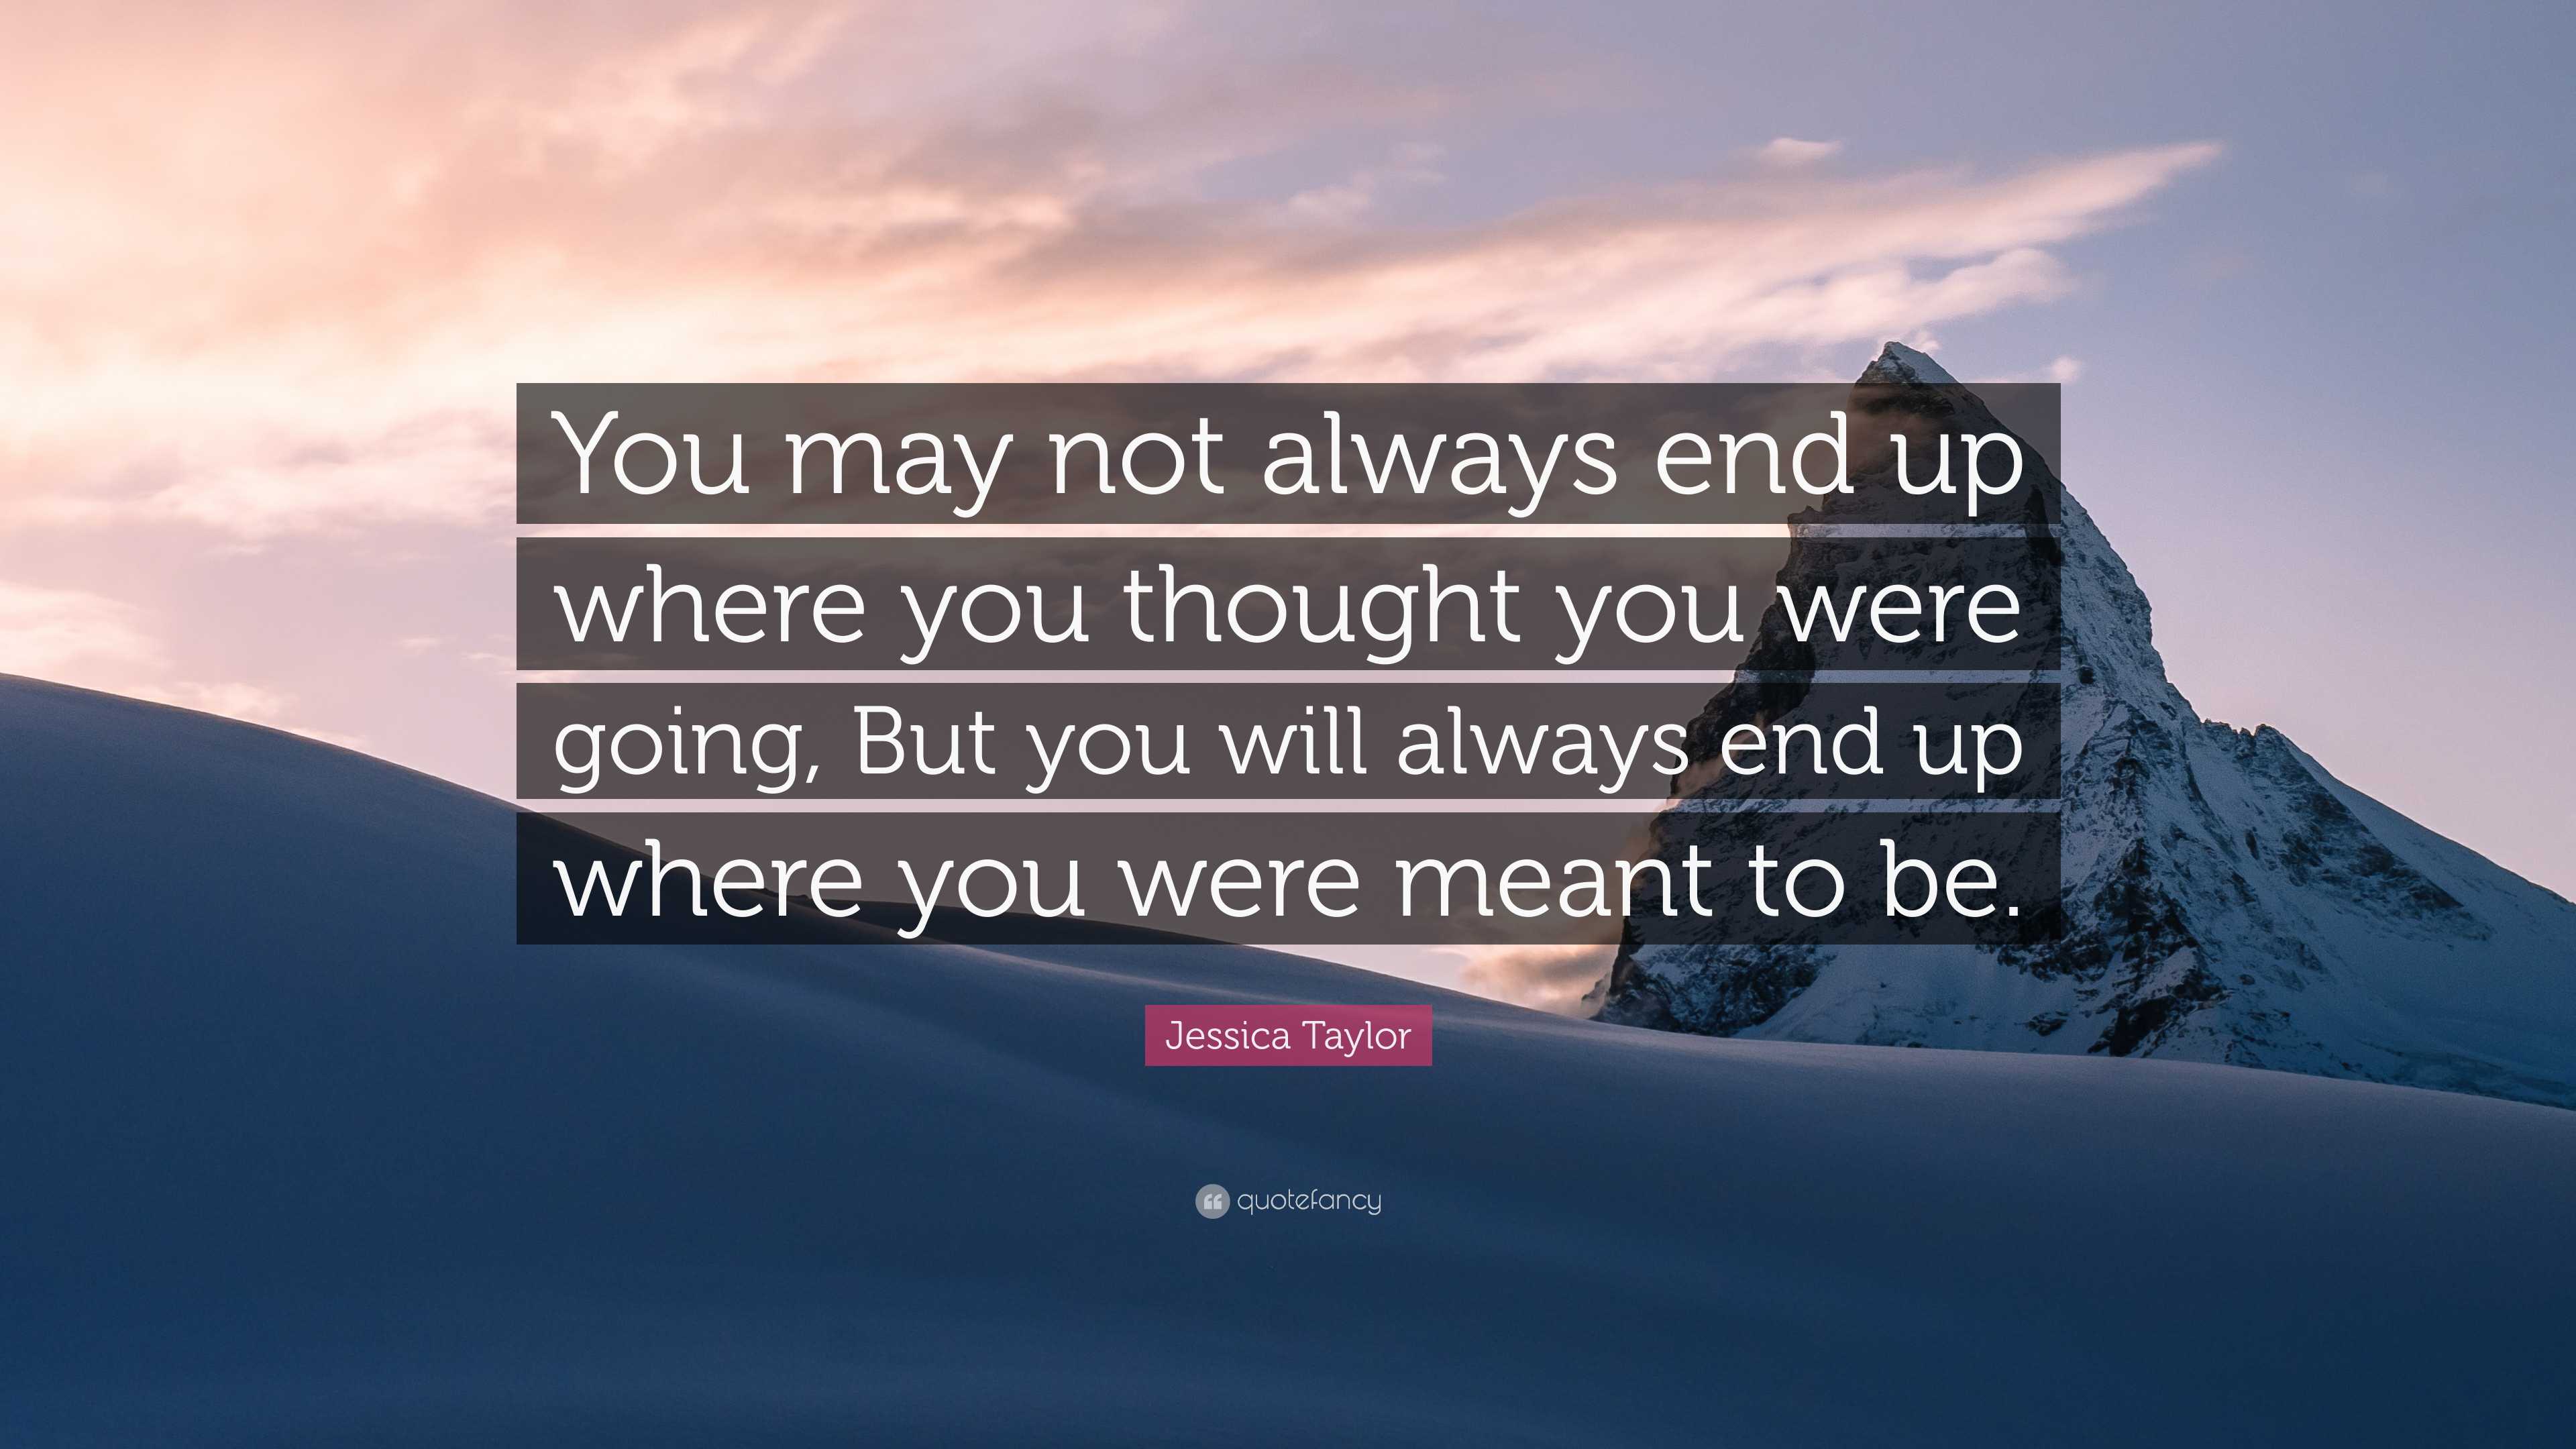 Jessica Taylor Quote: “You may not always end up where you thought you ...